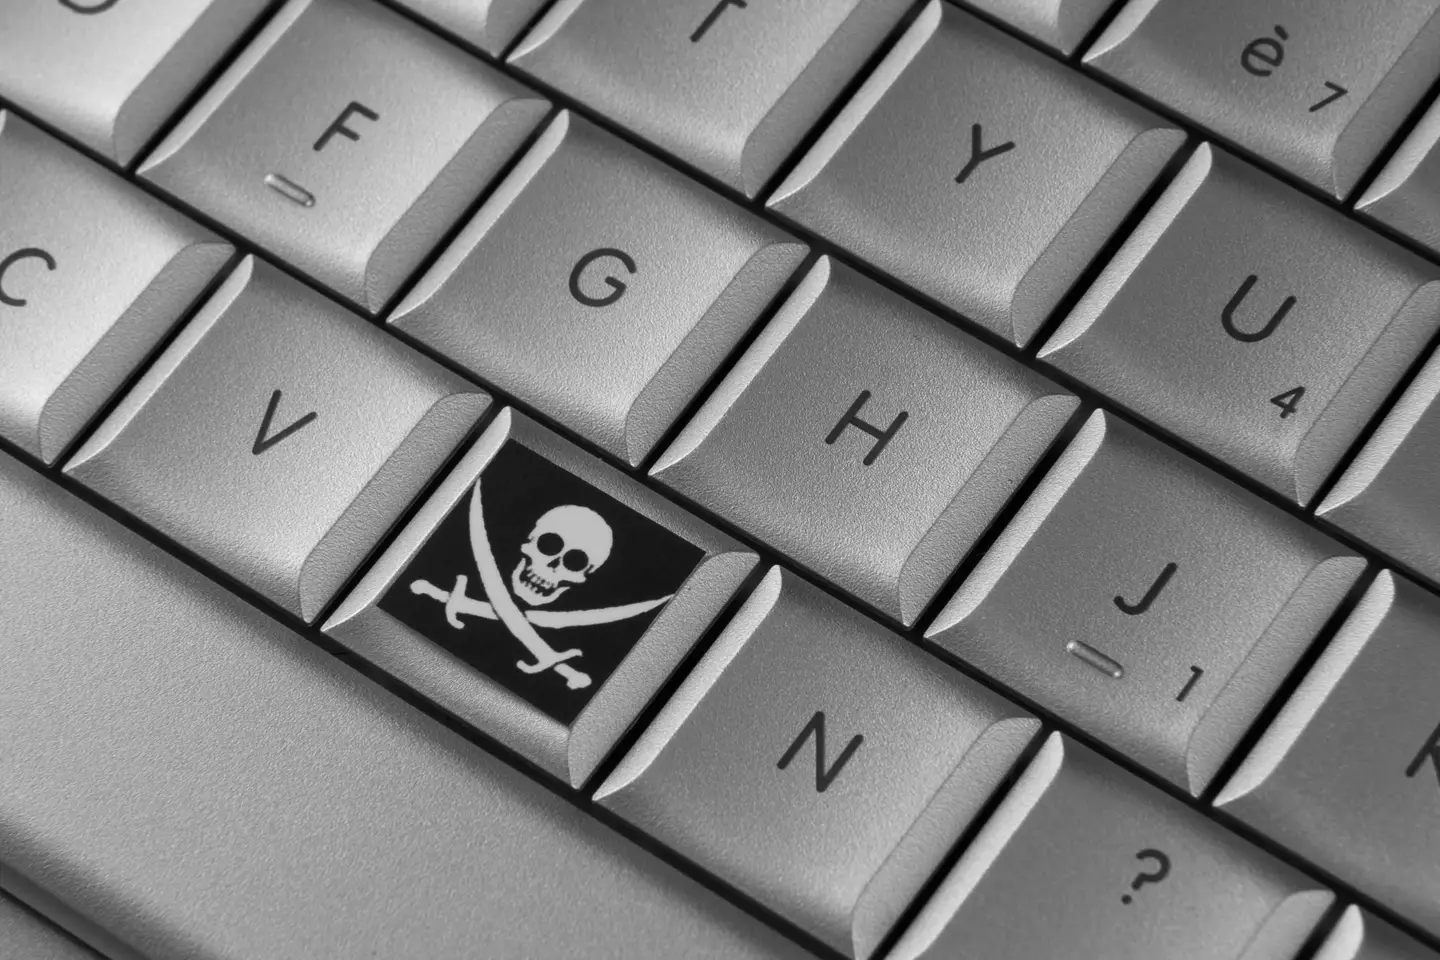 IPTV is used for piracy means by millions. Getty Stock Images